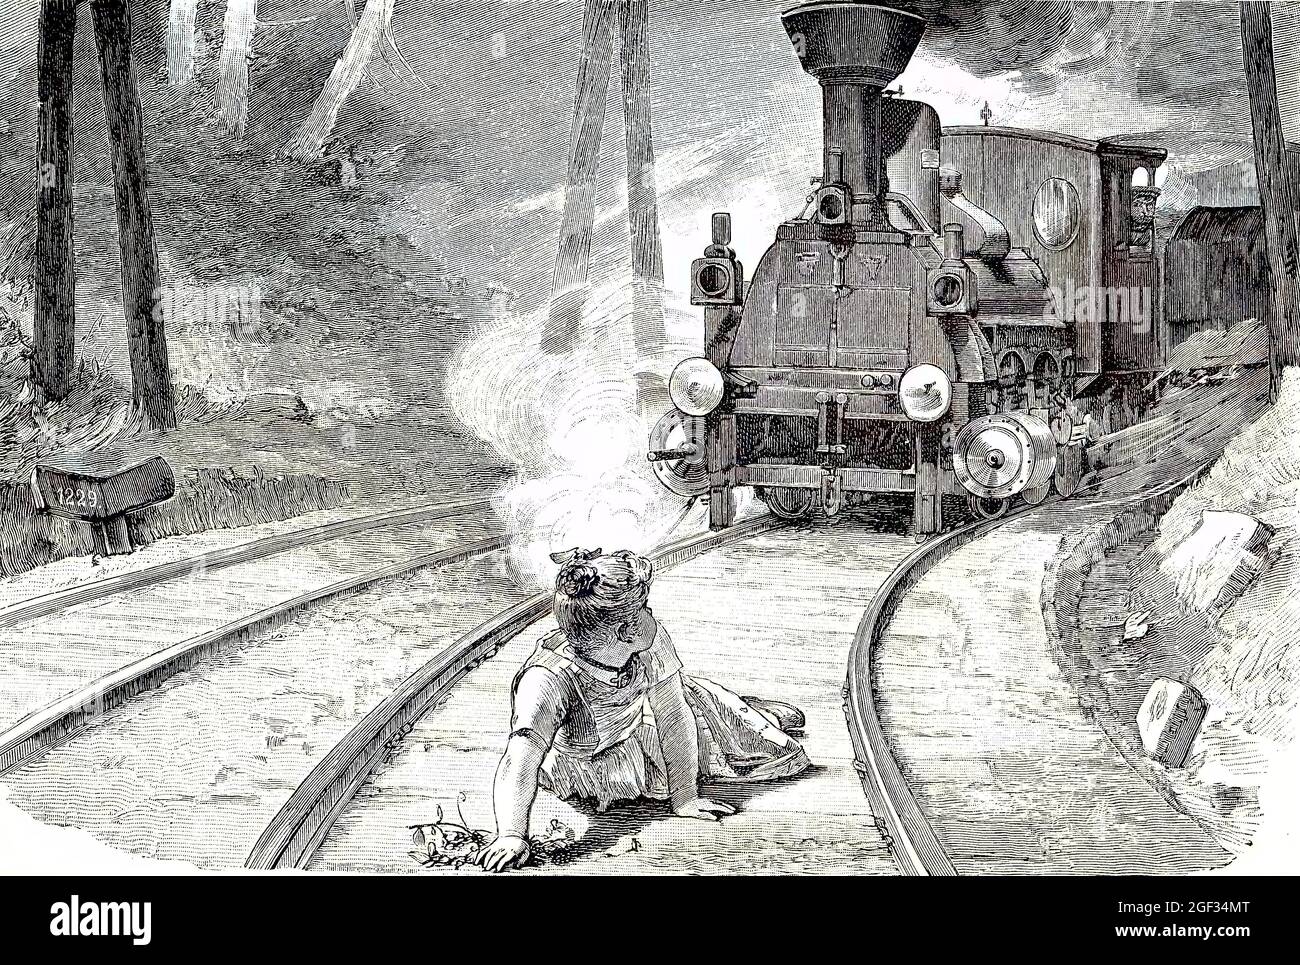 child plays on the railway tracks and is in danger. Kind spielt auf den Bahngleisen und ist in Gefahr, digital improved reproduction of an original print from the year 1881, Koloriert, Kolorierung, koloriert, handkoloriert, Hand-colouring, hand coloured, colored, Stock Photo